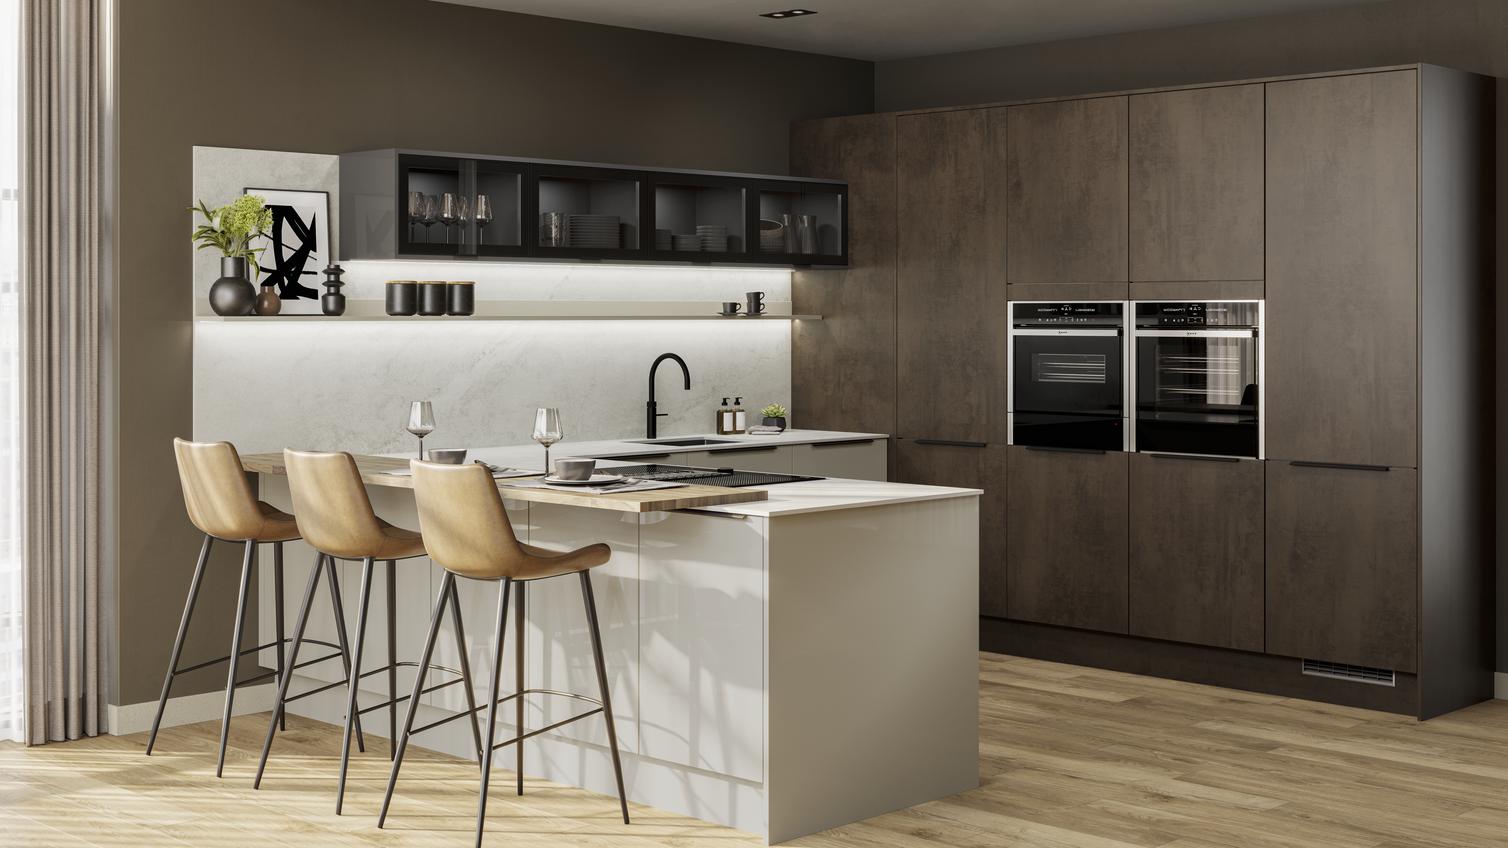 A contemporary two-tone kitchen with dark stone, cream slab doors, black handles, glazed wall units, and timber floors